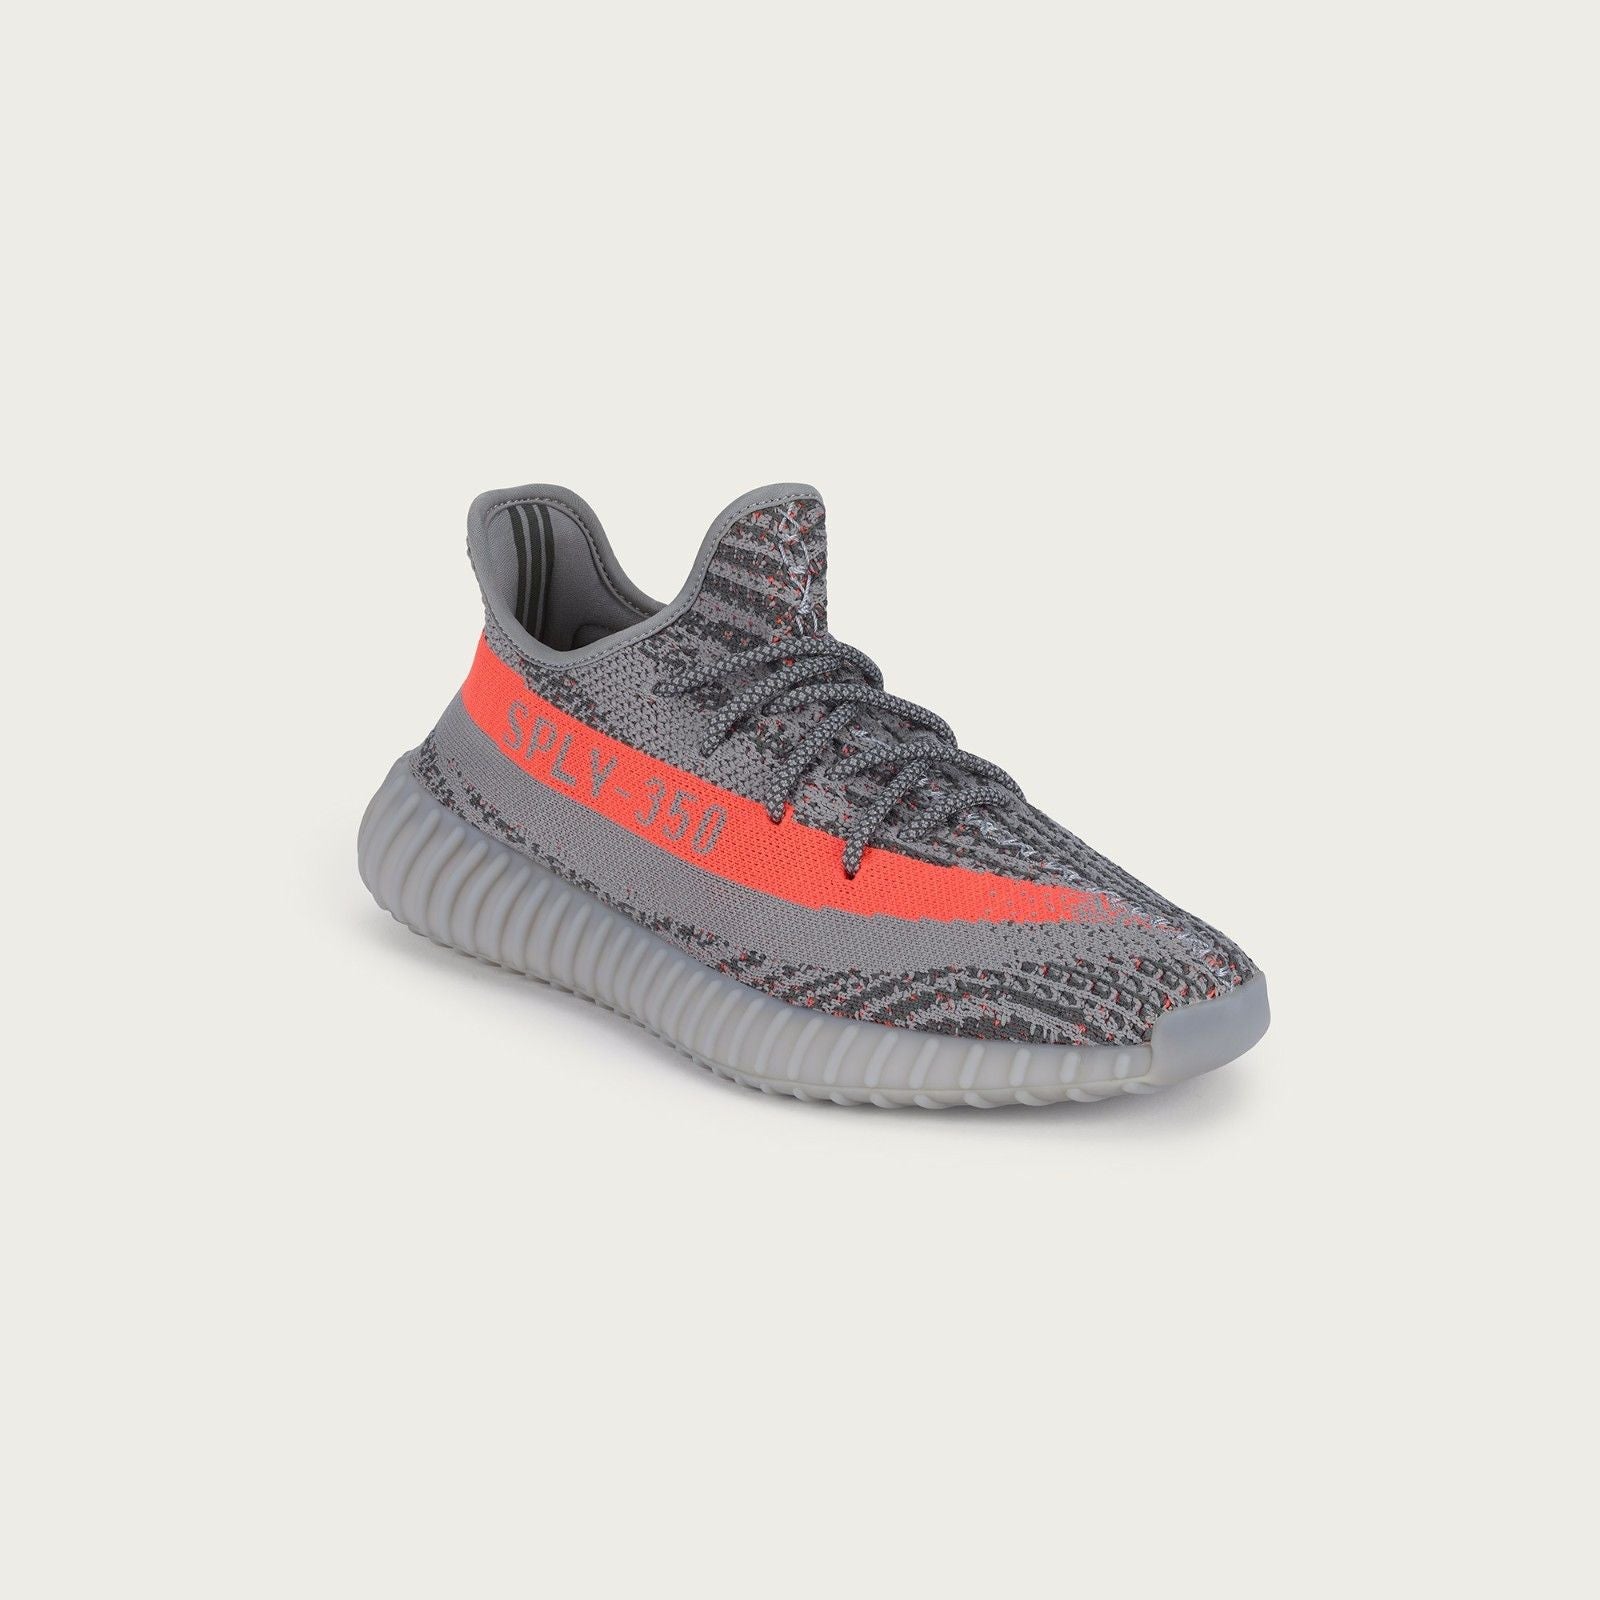 Adidas Yeezy Boost 350 Womans V2 SPLY 